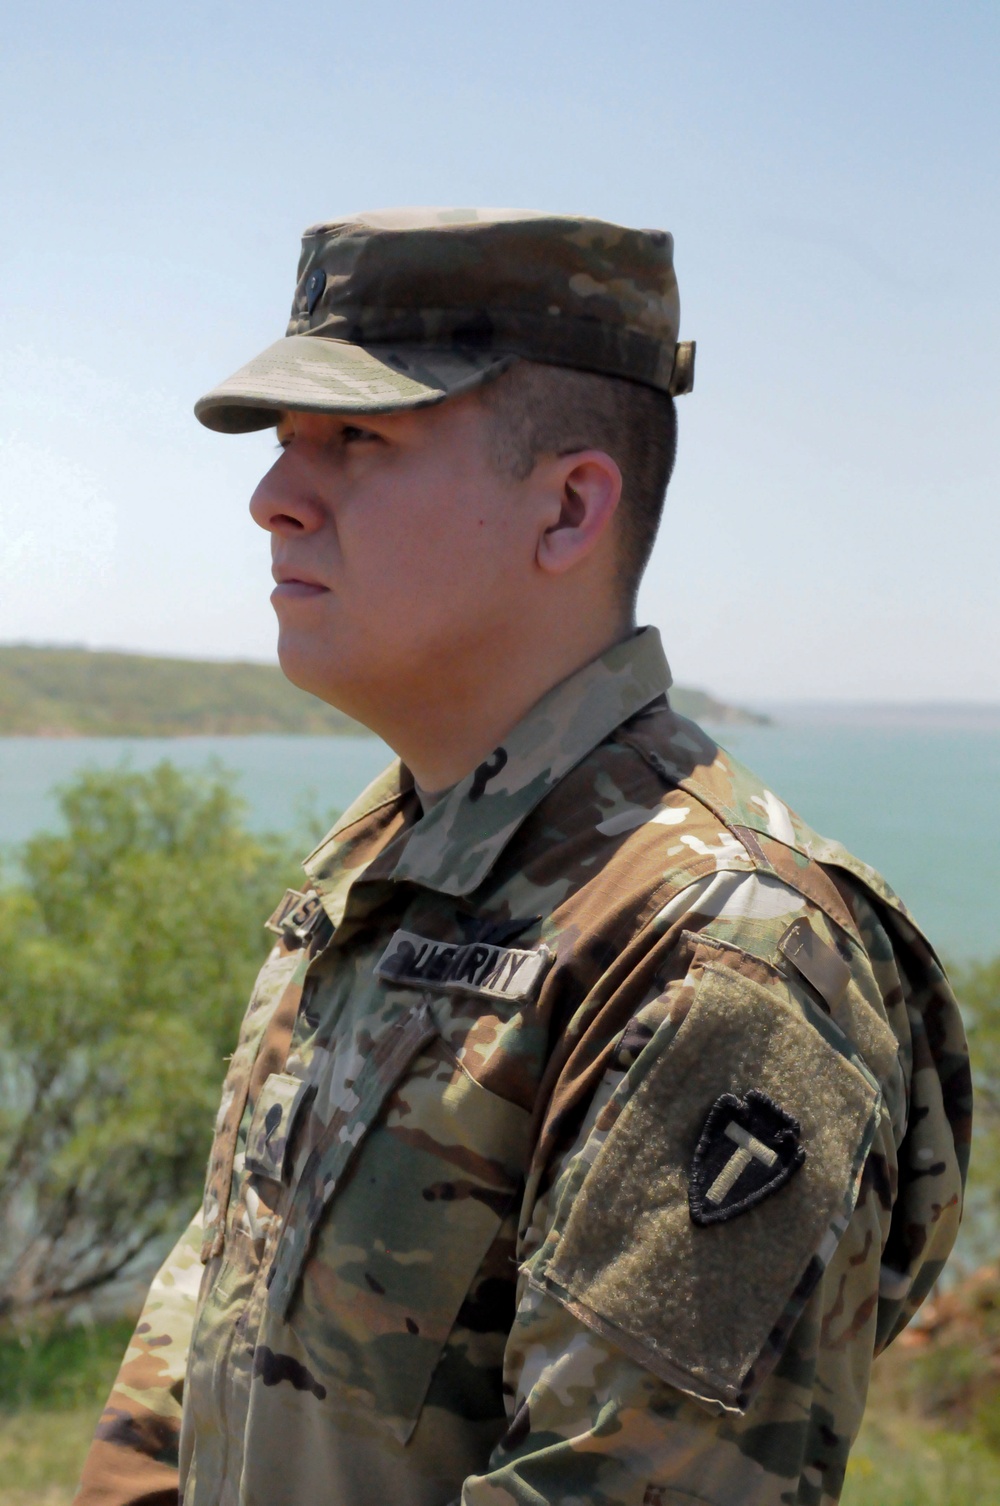 Texas National Guard Counterdrug Soldier to lead Panhandle Civil Ops two years after father’s overdose